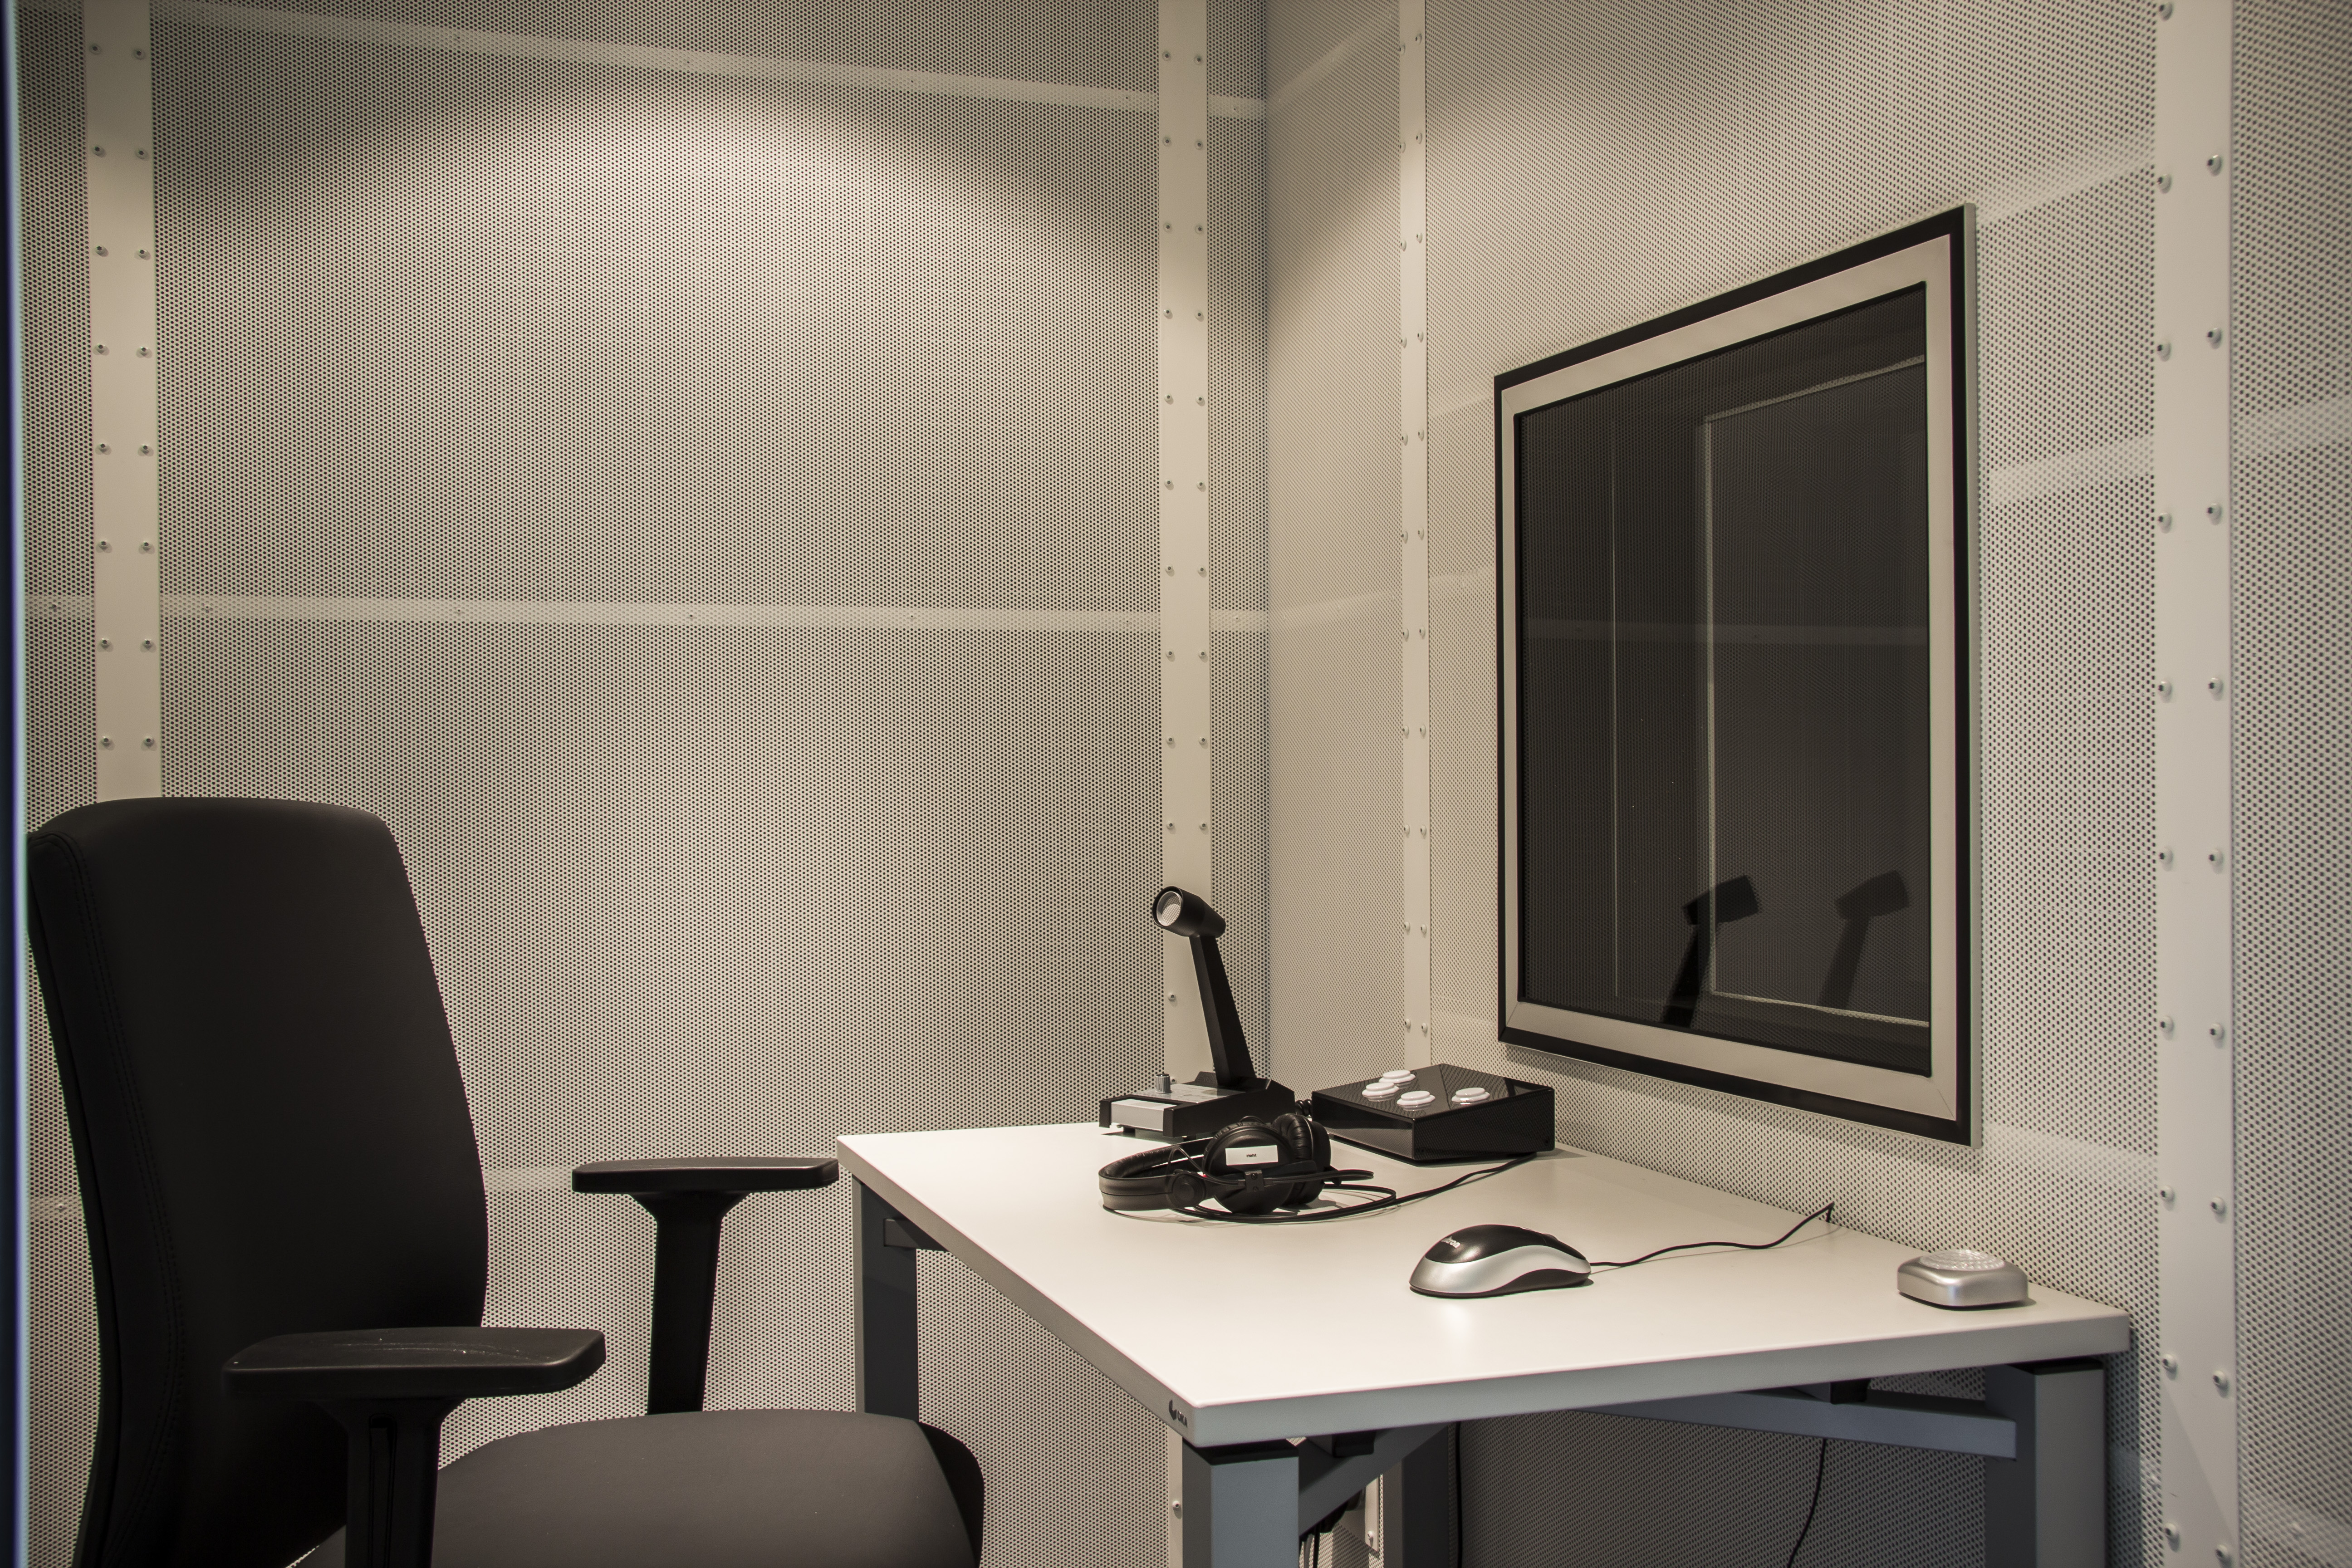 sound-attenuated room, interior with chair, desk and input devices